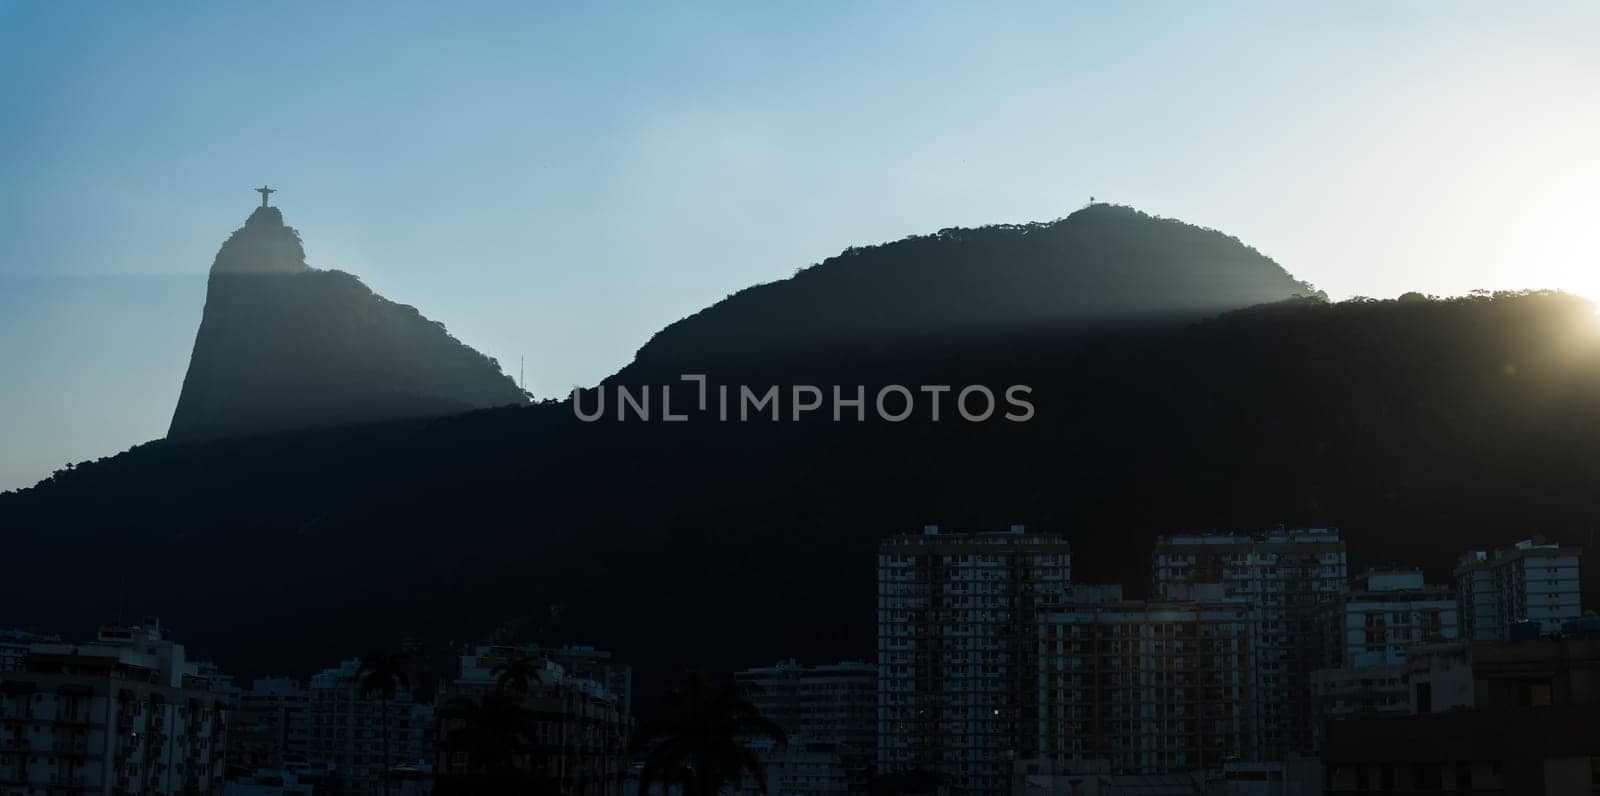 Scenic Sunset View with Christ the Redeemer and Mountains of Rio de Janeiro by FerradalFCG